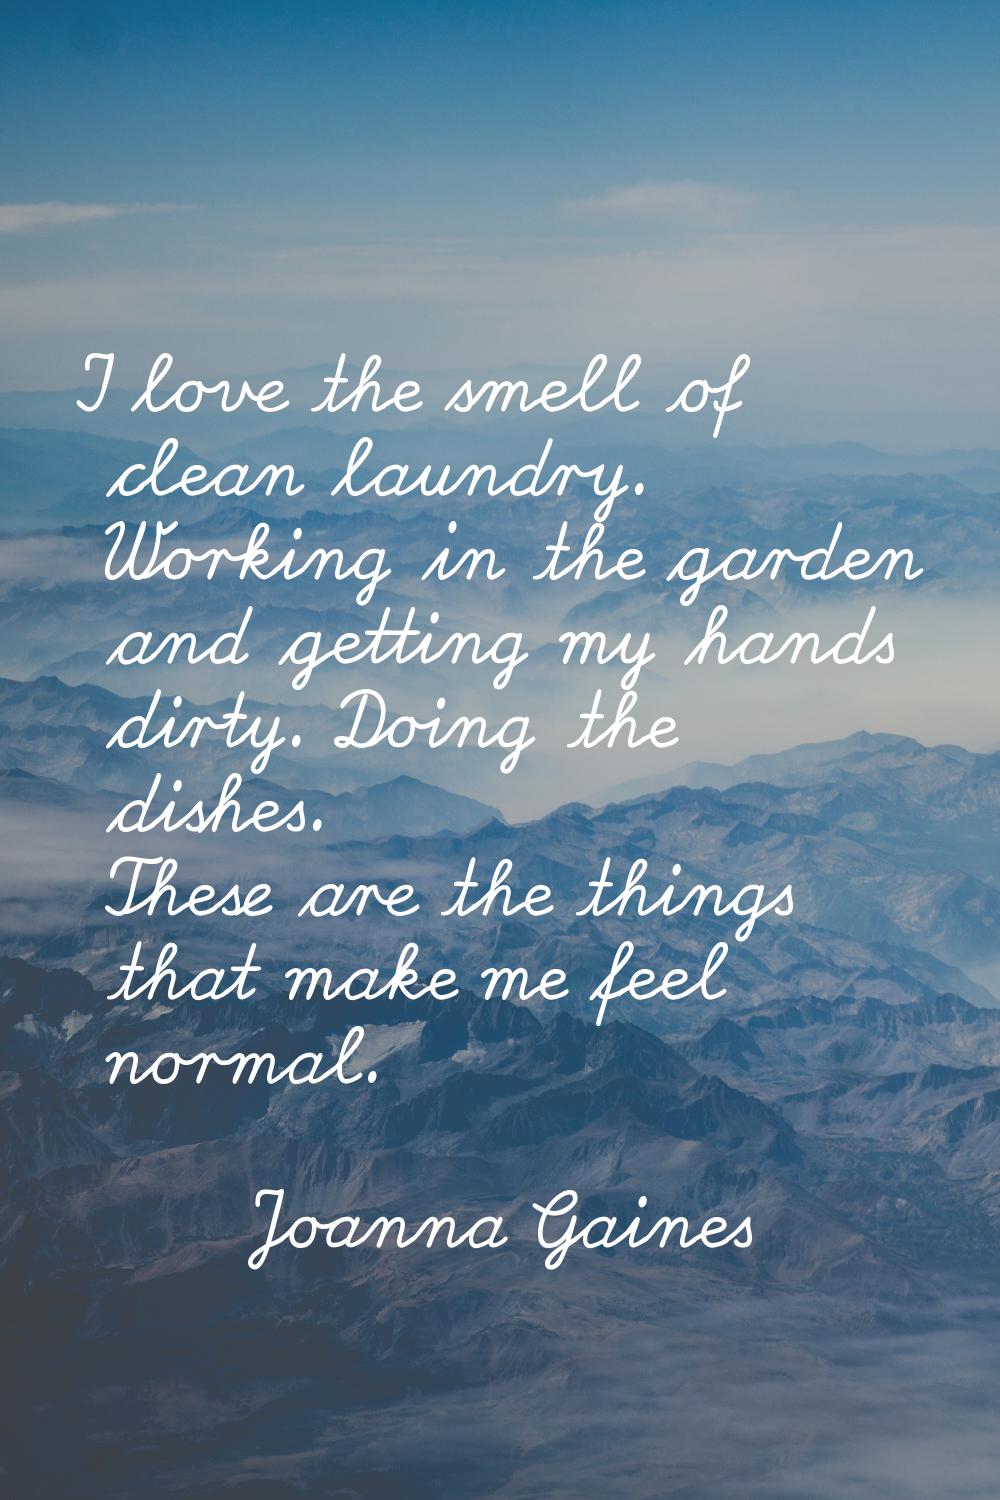 I love the smell of clean laundry. Working in the garden and getting my hands dirty. Doing the dish